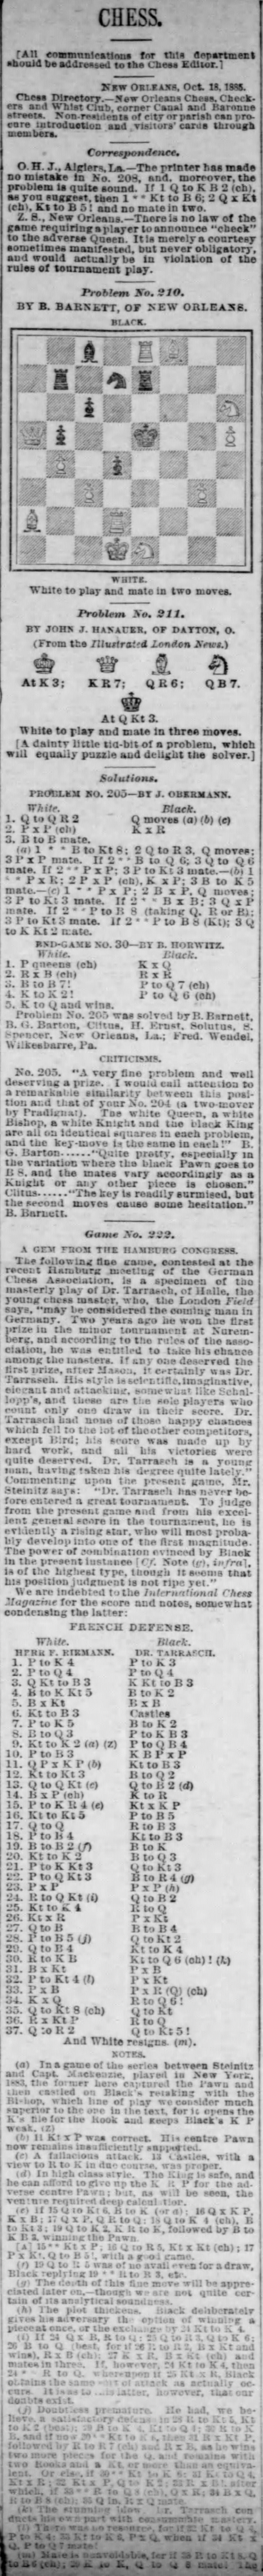 1885.10.24-01 New Orleans Weekly Times-Democrat.png